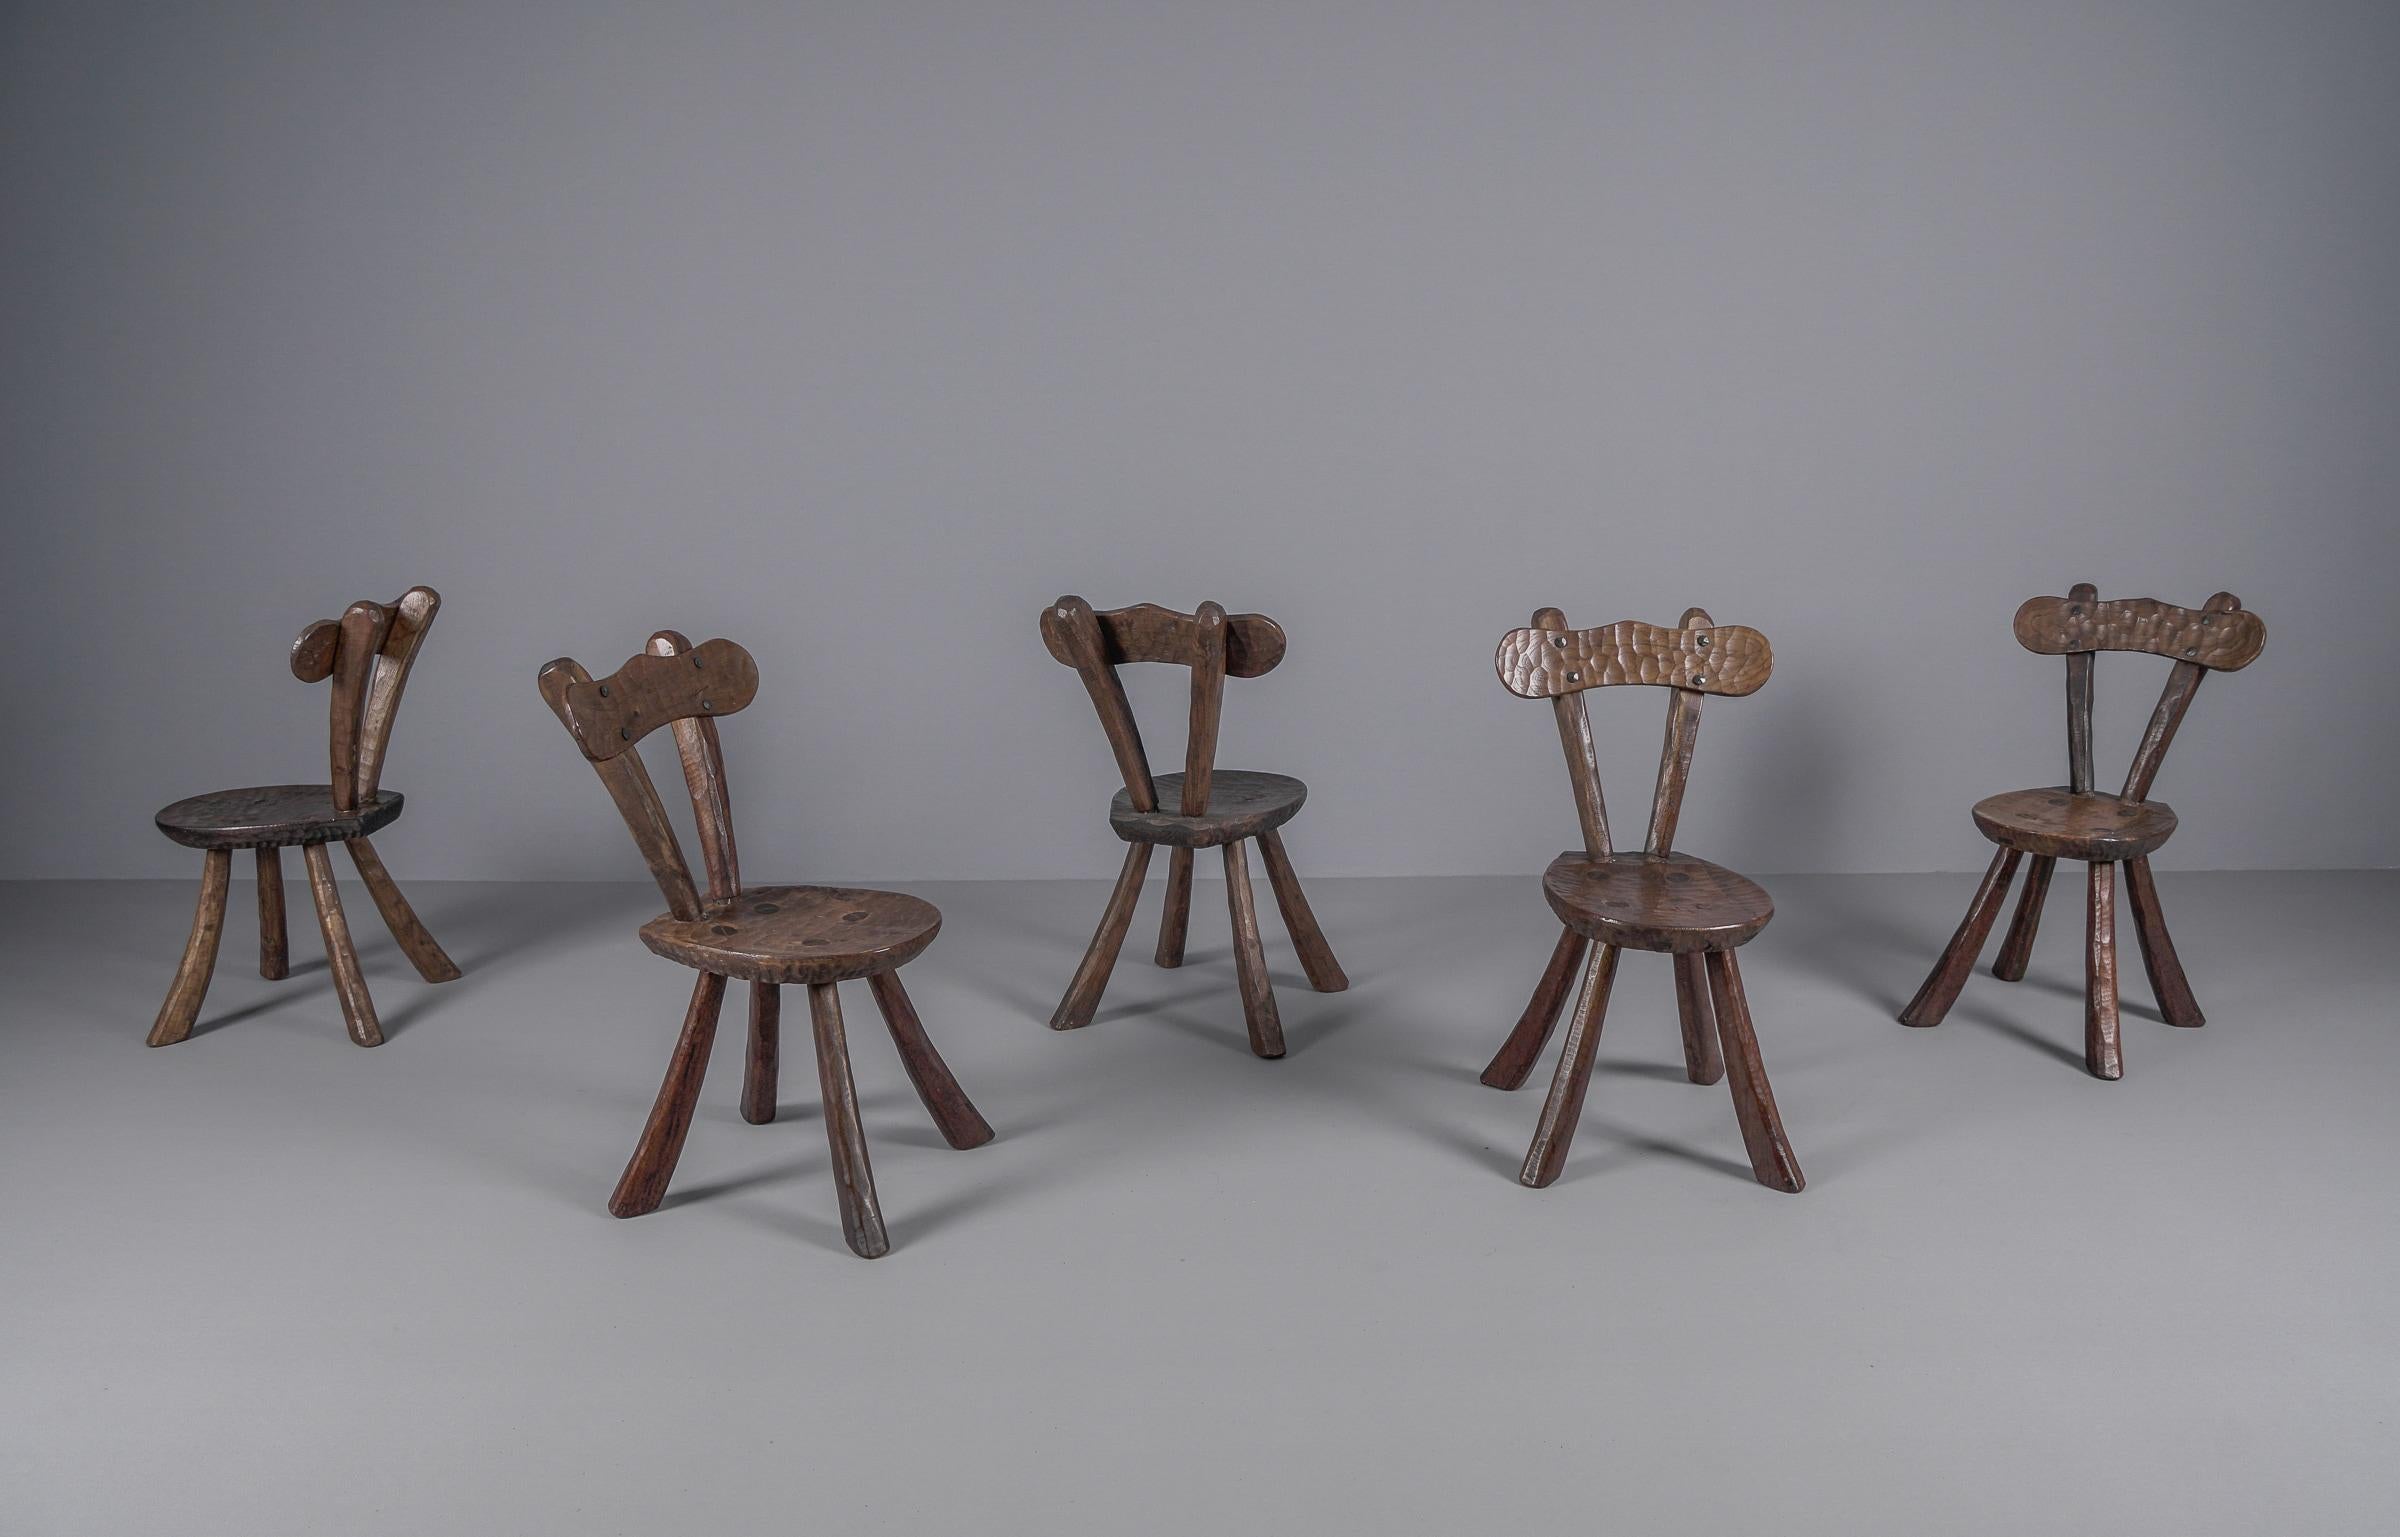 Mid-20th Century Set of 5 Brutalist Rustic Modern Sculptured Chairs i. t. Style of Alexandre Noll For Sale